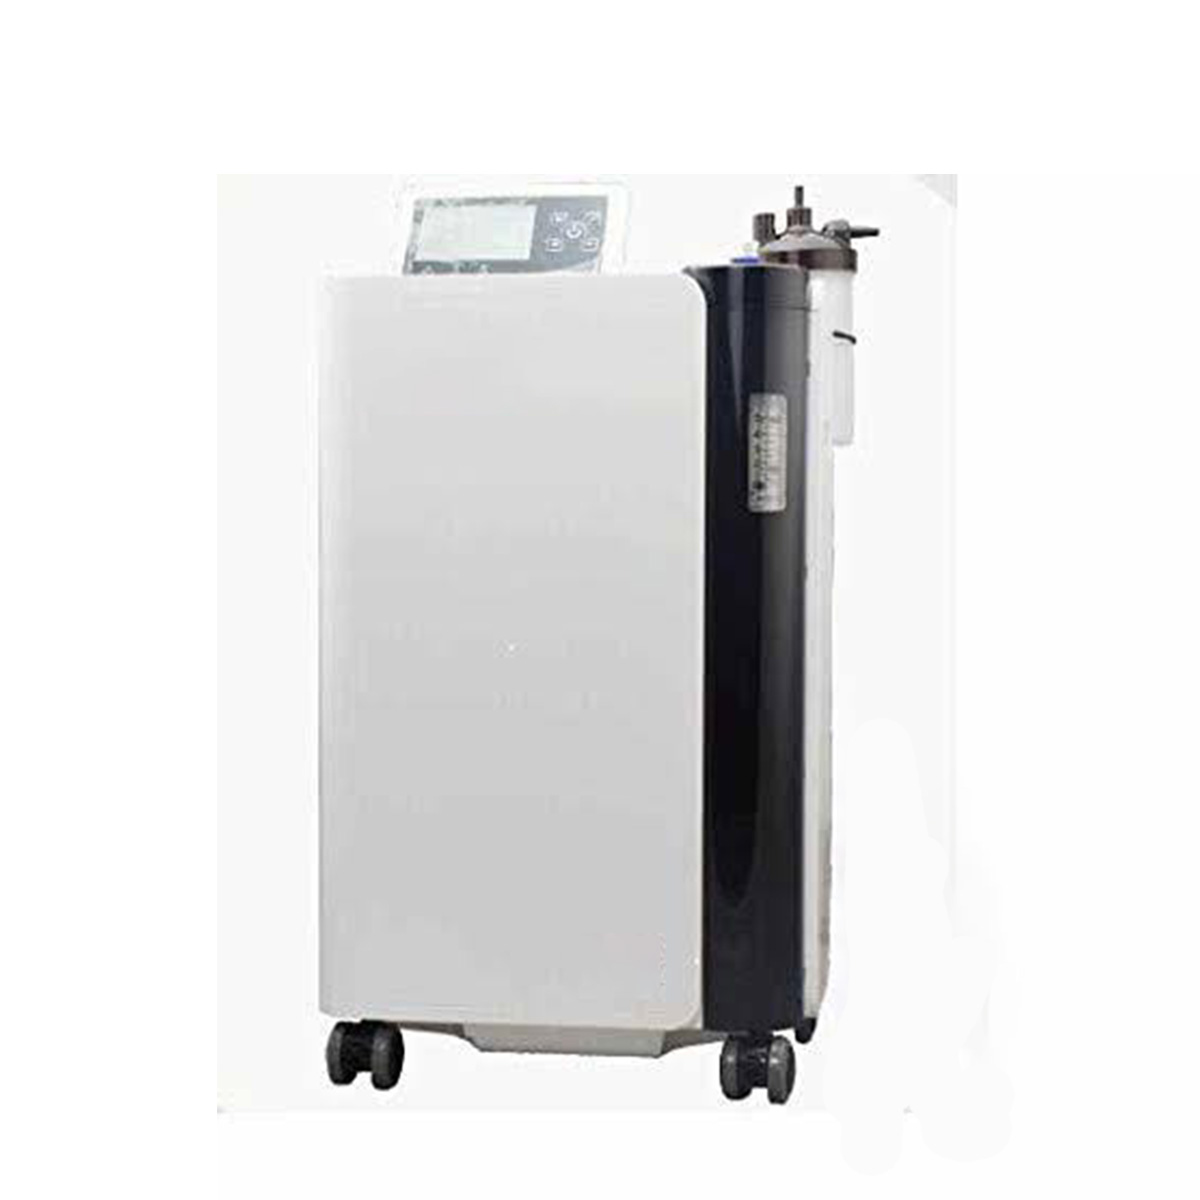 5 Lpm Oxymed Oxygen Concentrator On Sale Suppliers, Service Provider in Badarpur